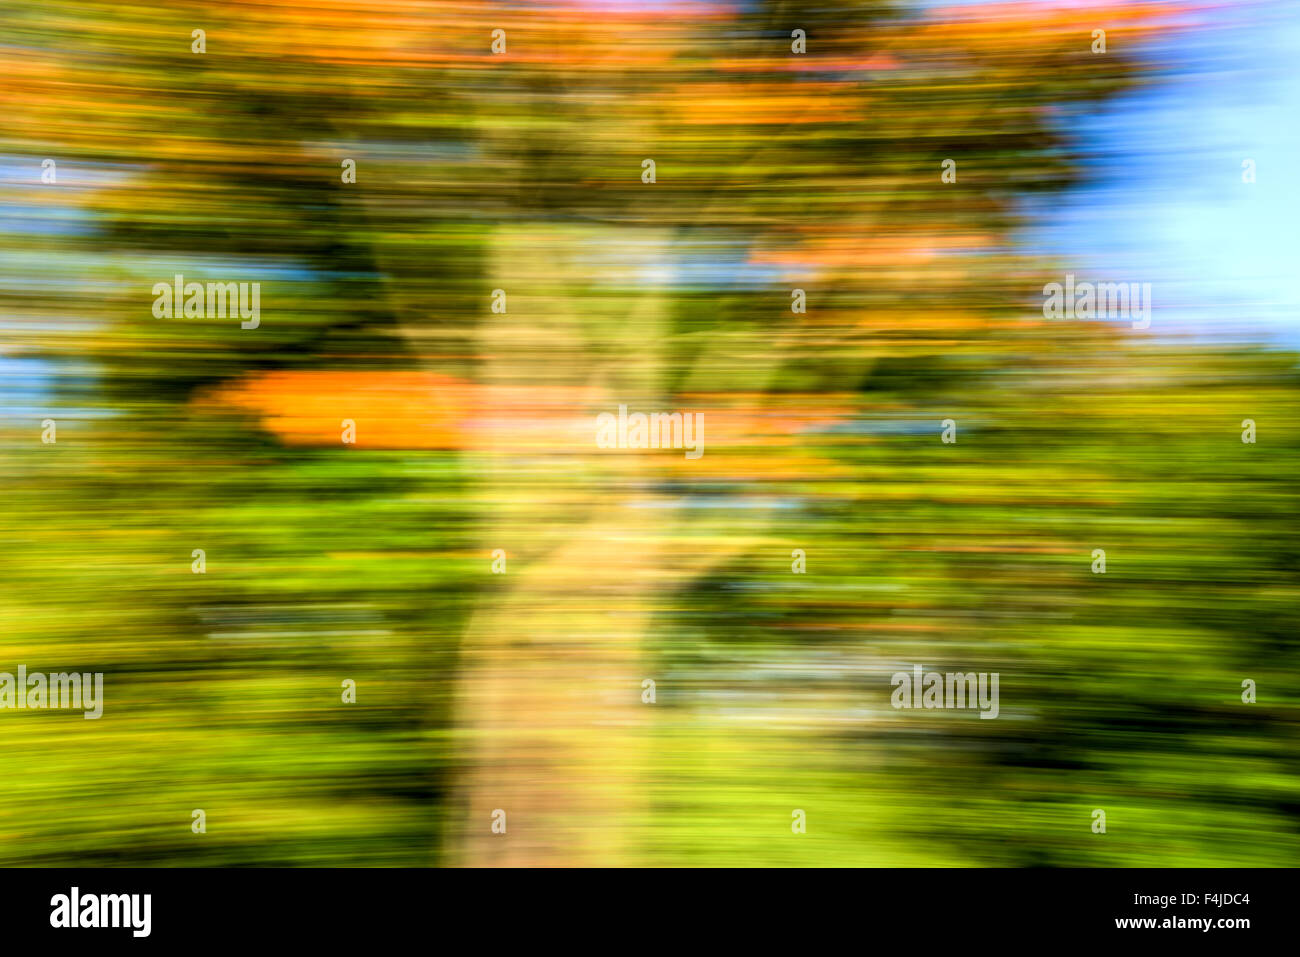 Fall autumn movement leaves motion tossing stripes photo blurred, weather, autumn, blue, yellow, red, fall leaves, autumn moves, Stock Photo